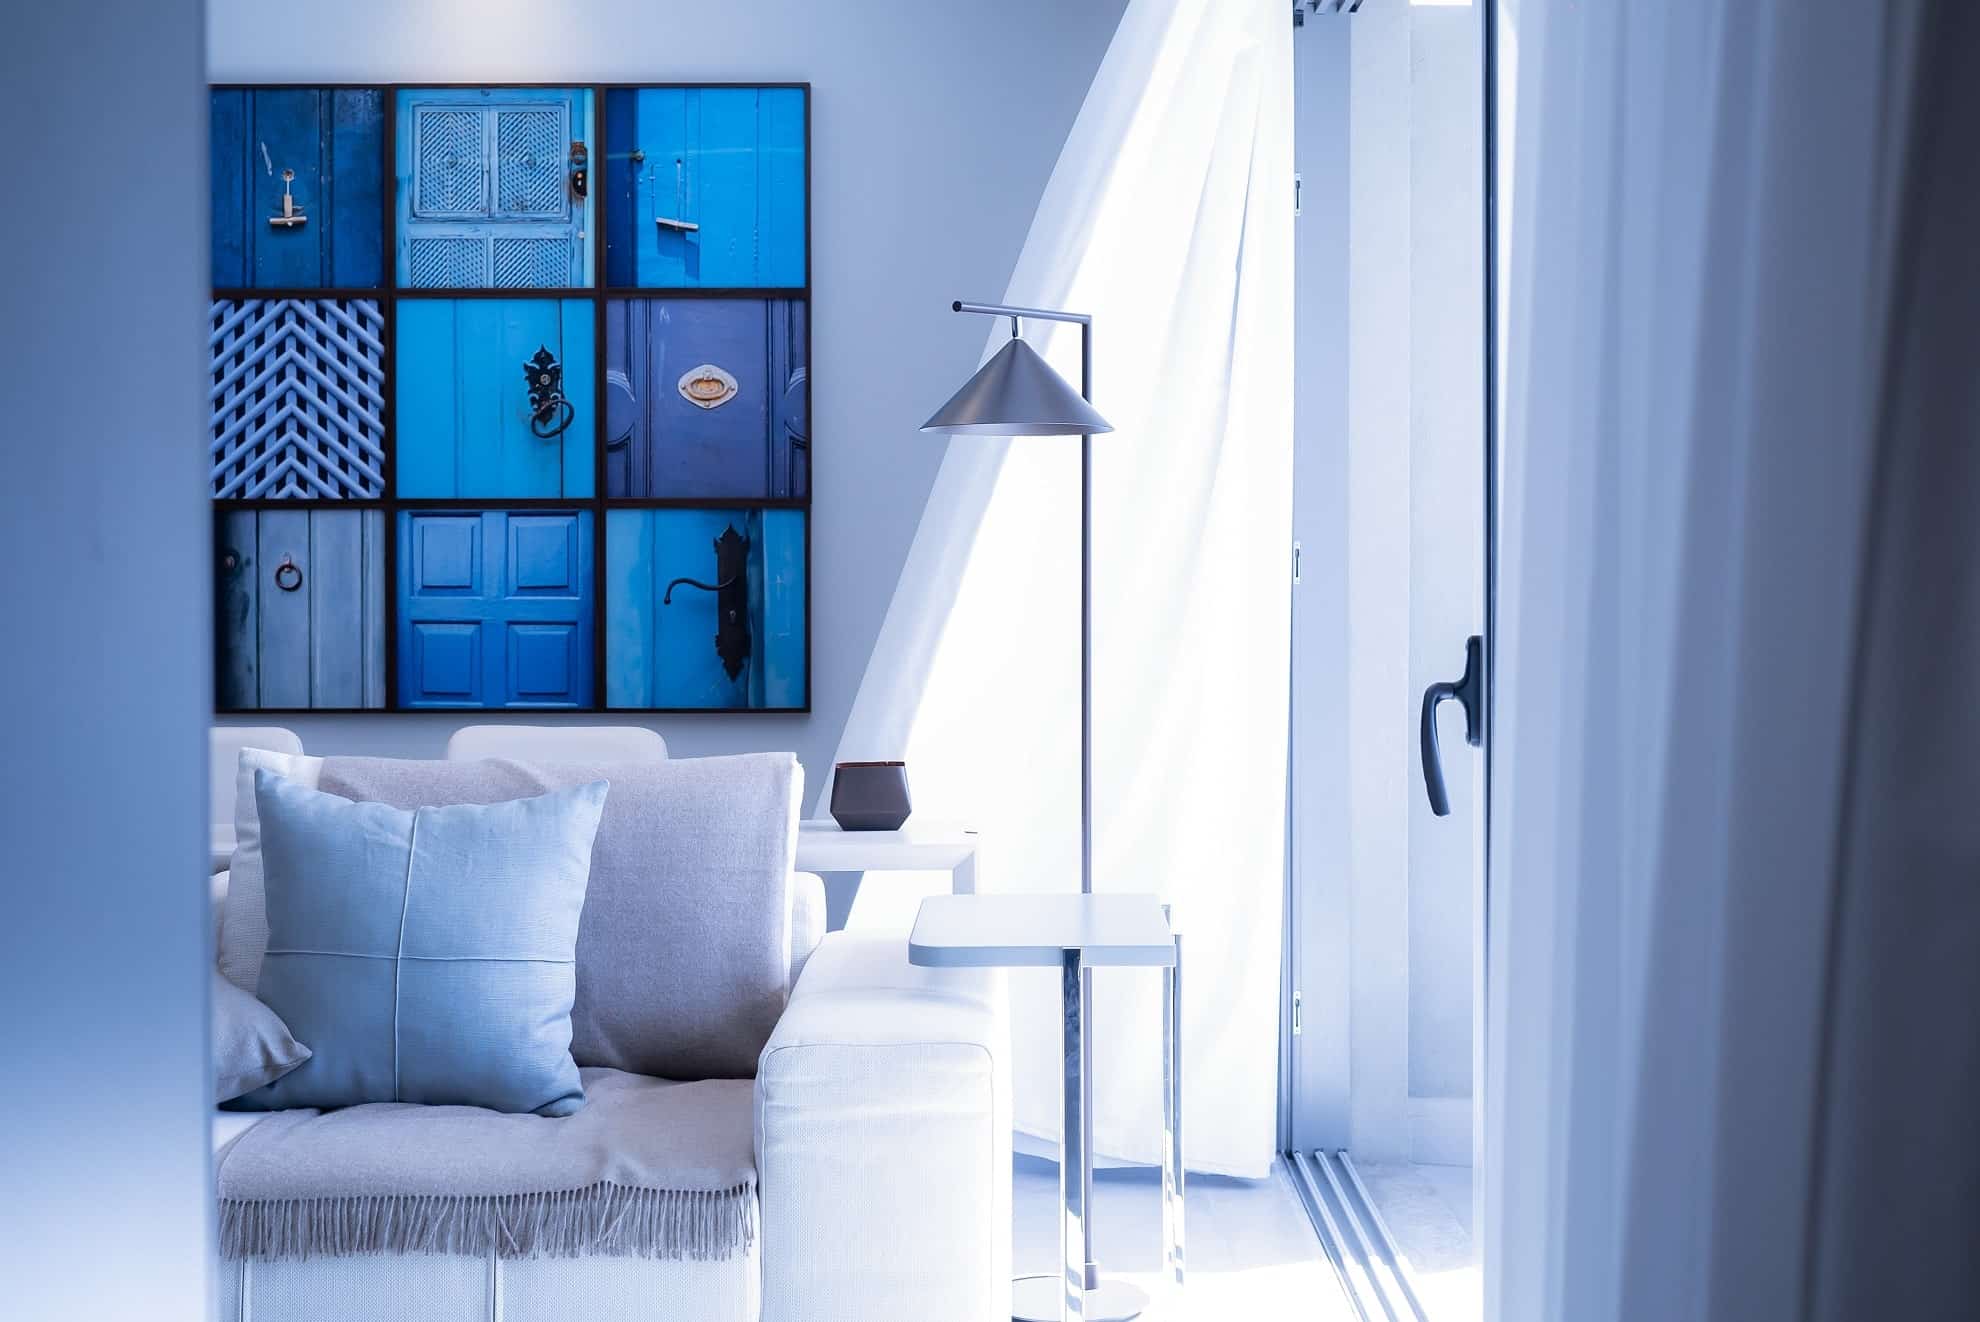 An apartment living room with blue, white, and silver furniture, curtains, and fixtures.